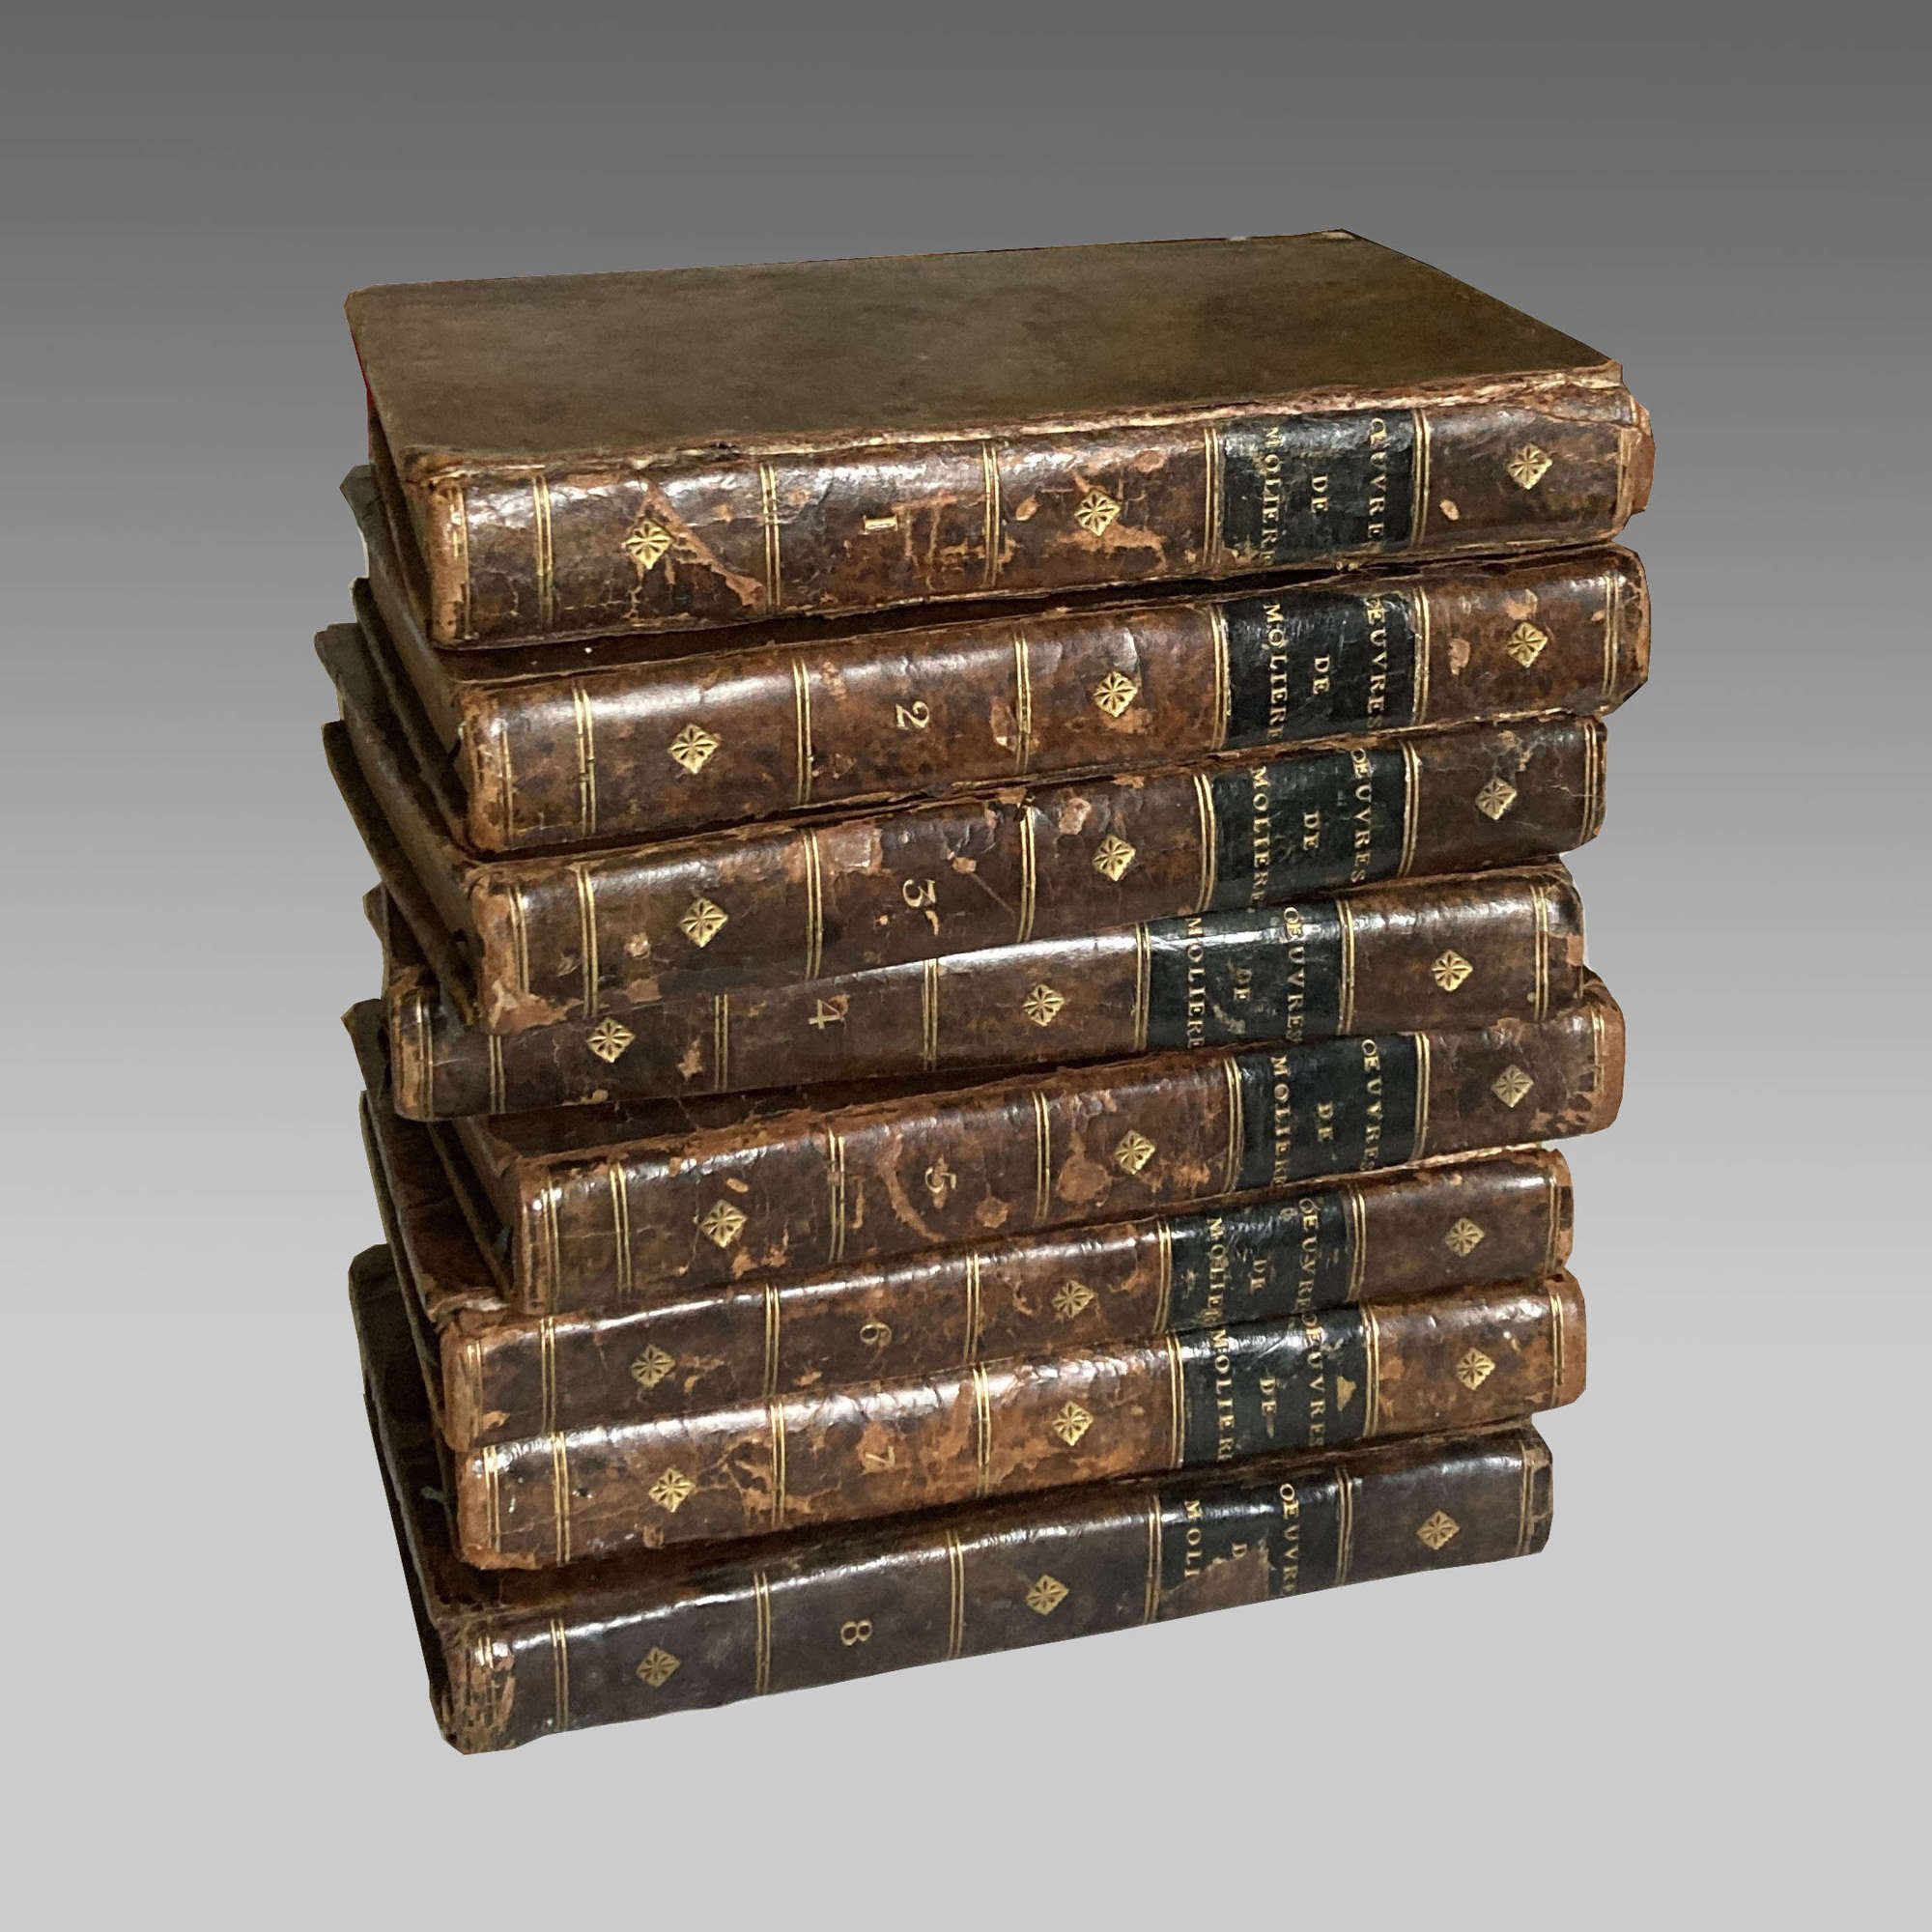 Eight Volumes, ‘The Works of Molière, published in 1813